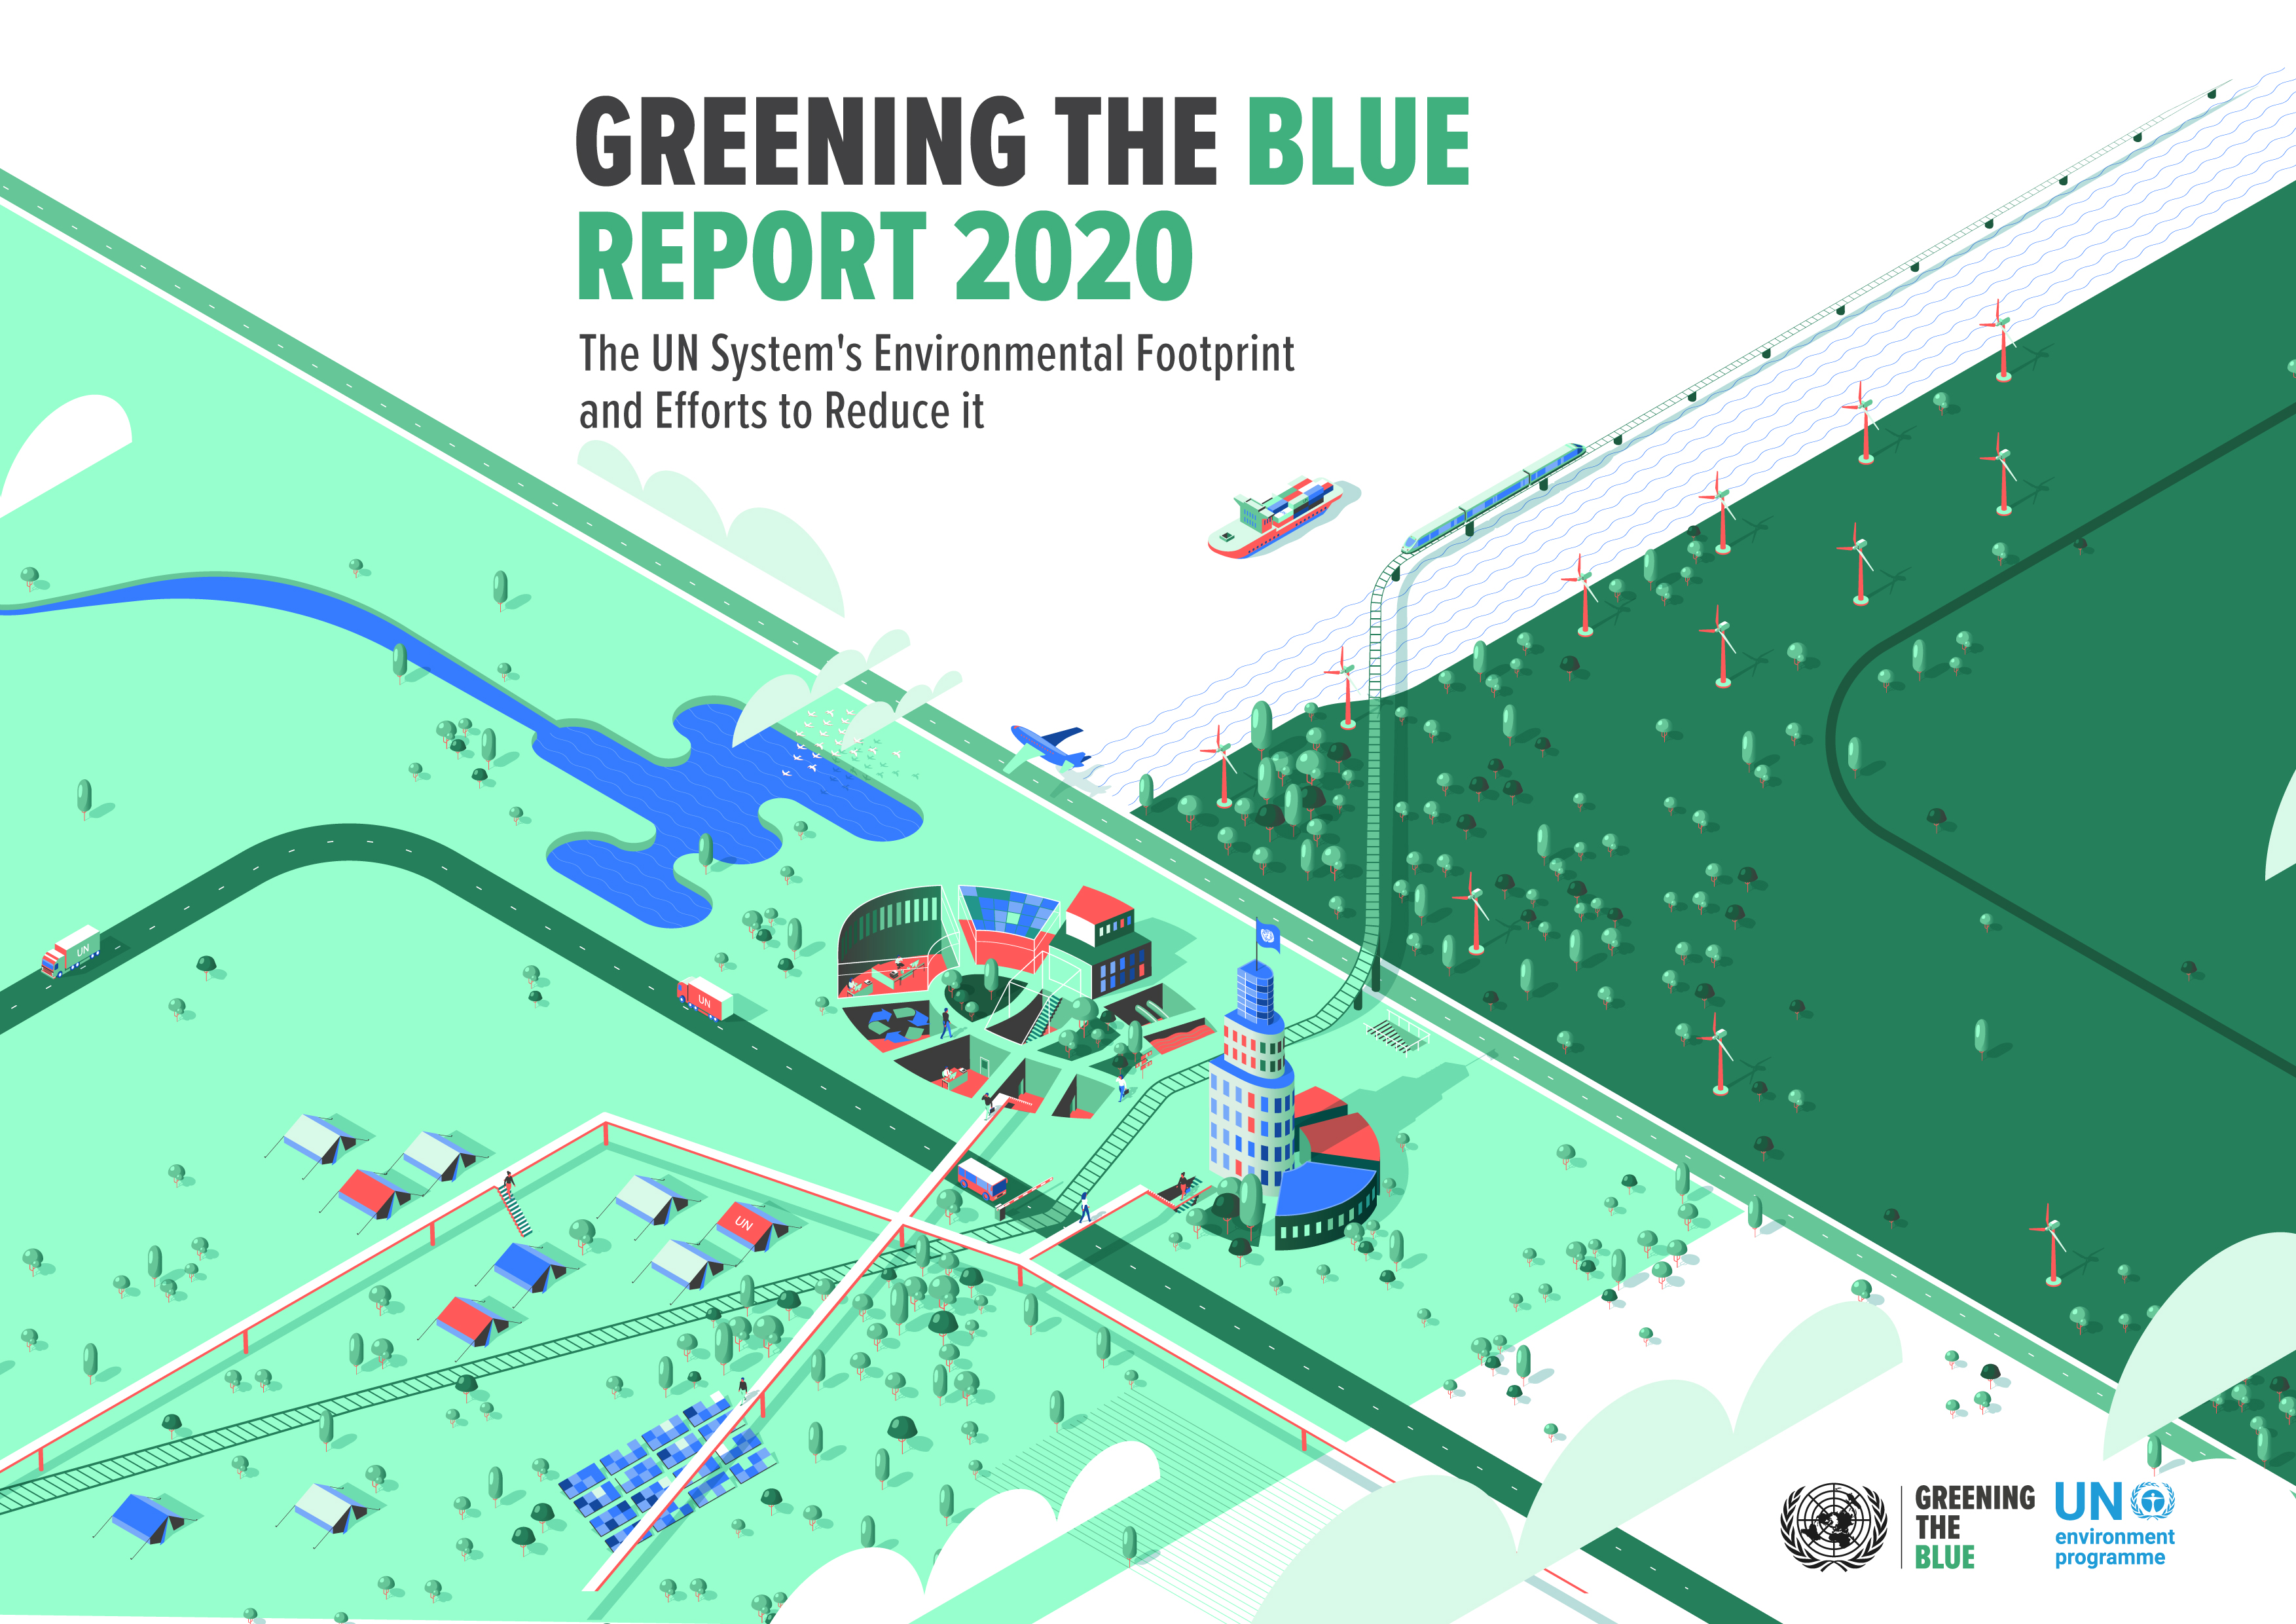 image of Greening the Blue Report 2020